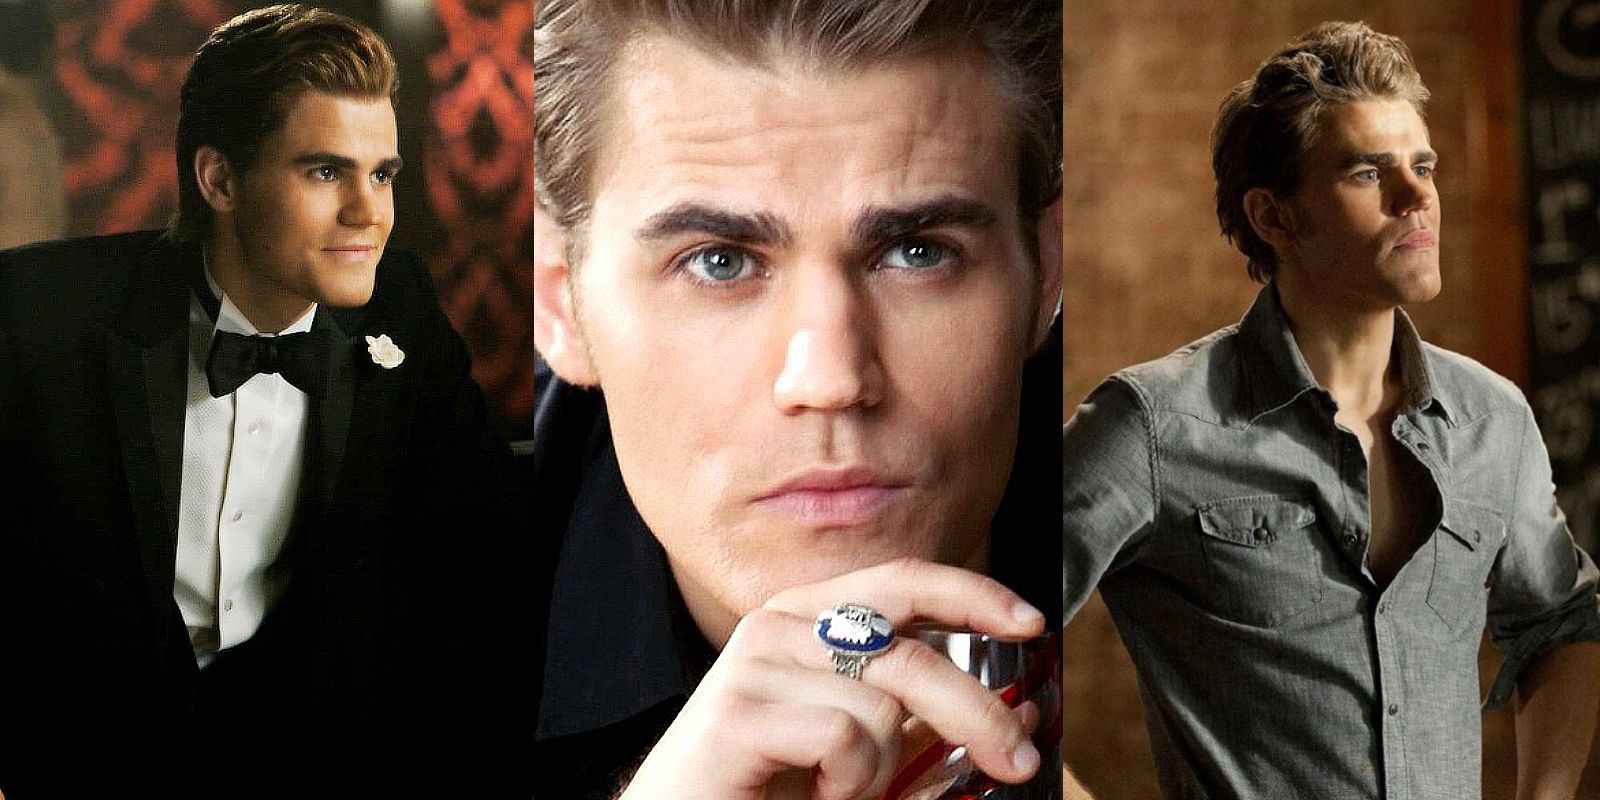 A split image of Stefan in a tuxedo, having a drink of whisky, and looking serious in The Vampire Diaries